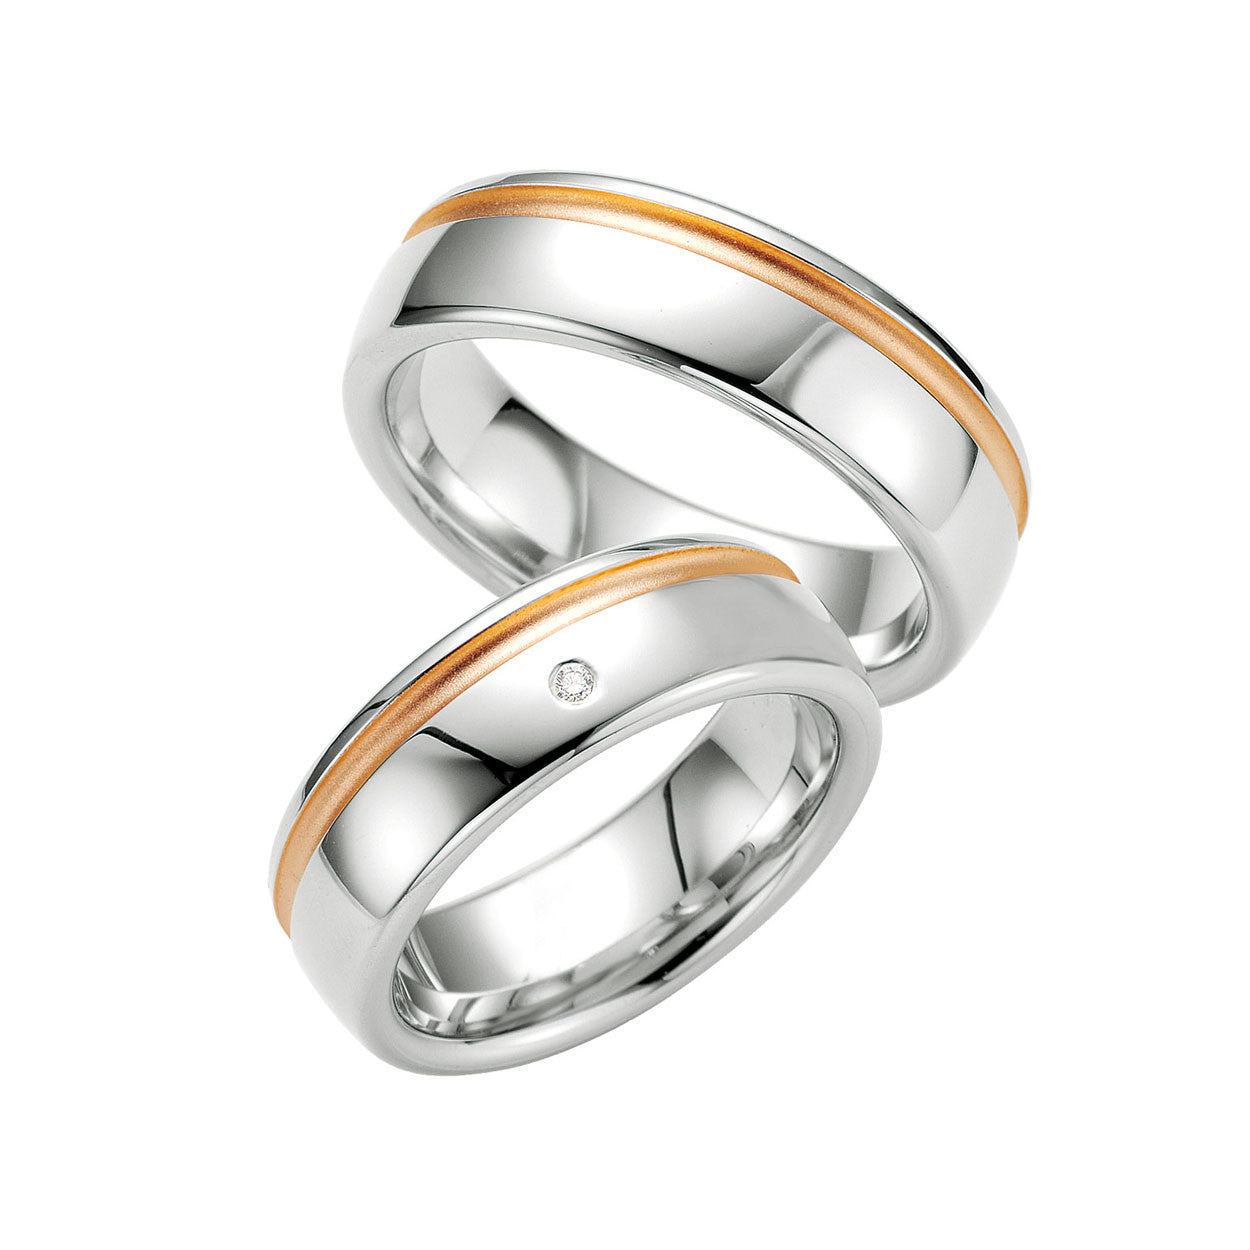 Men's Sterling Silver, Diamond and Rose Gold Wedding Band